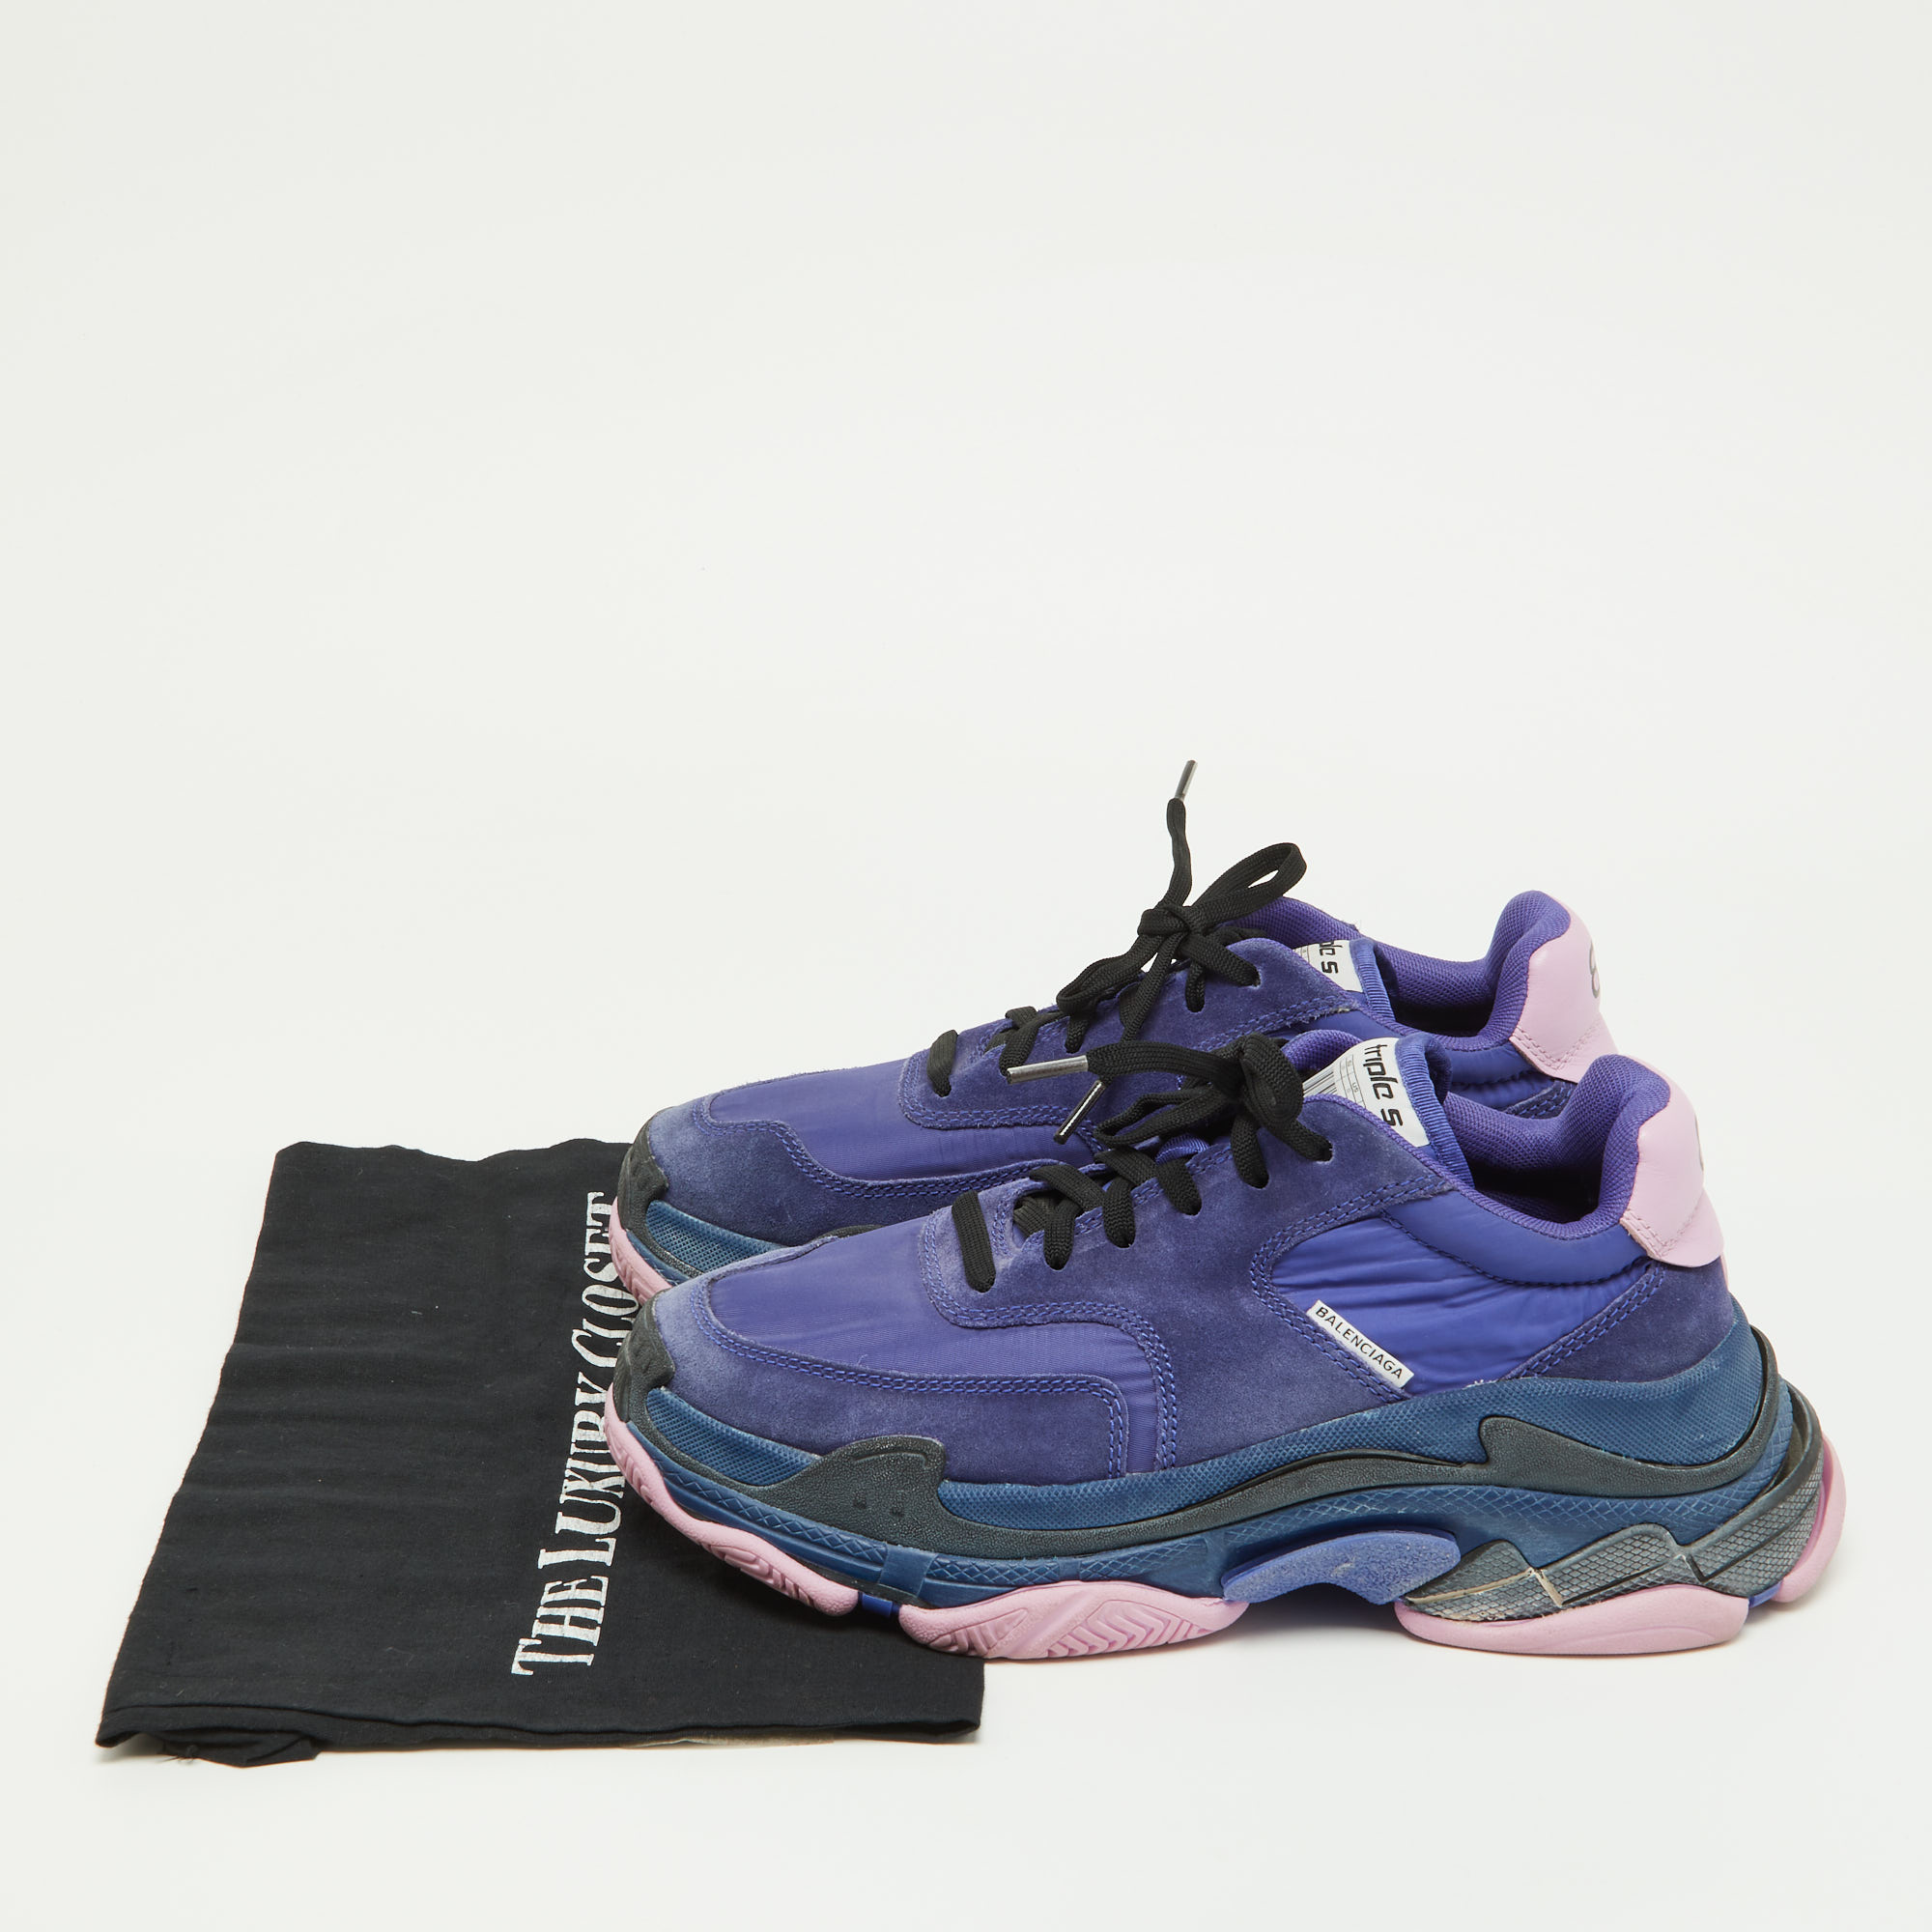 Balenciaga Purple/Pink Nylon And Leather Triple S Sneakers Size 39